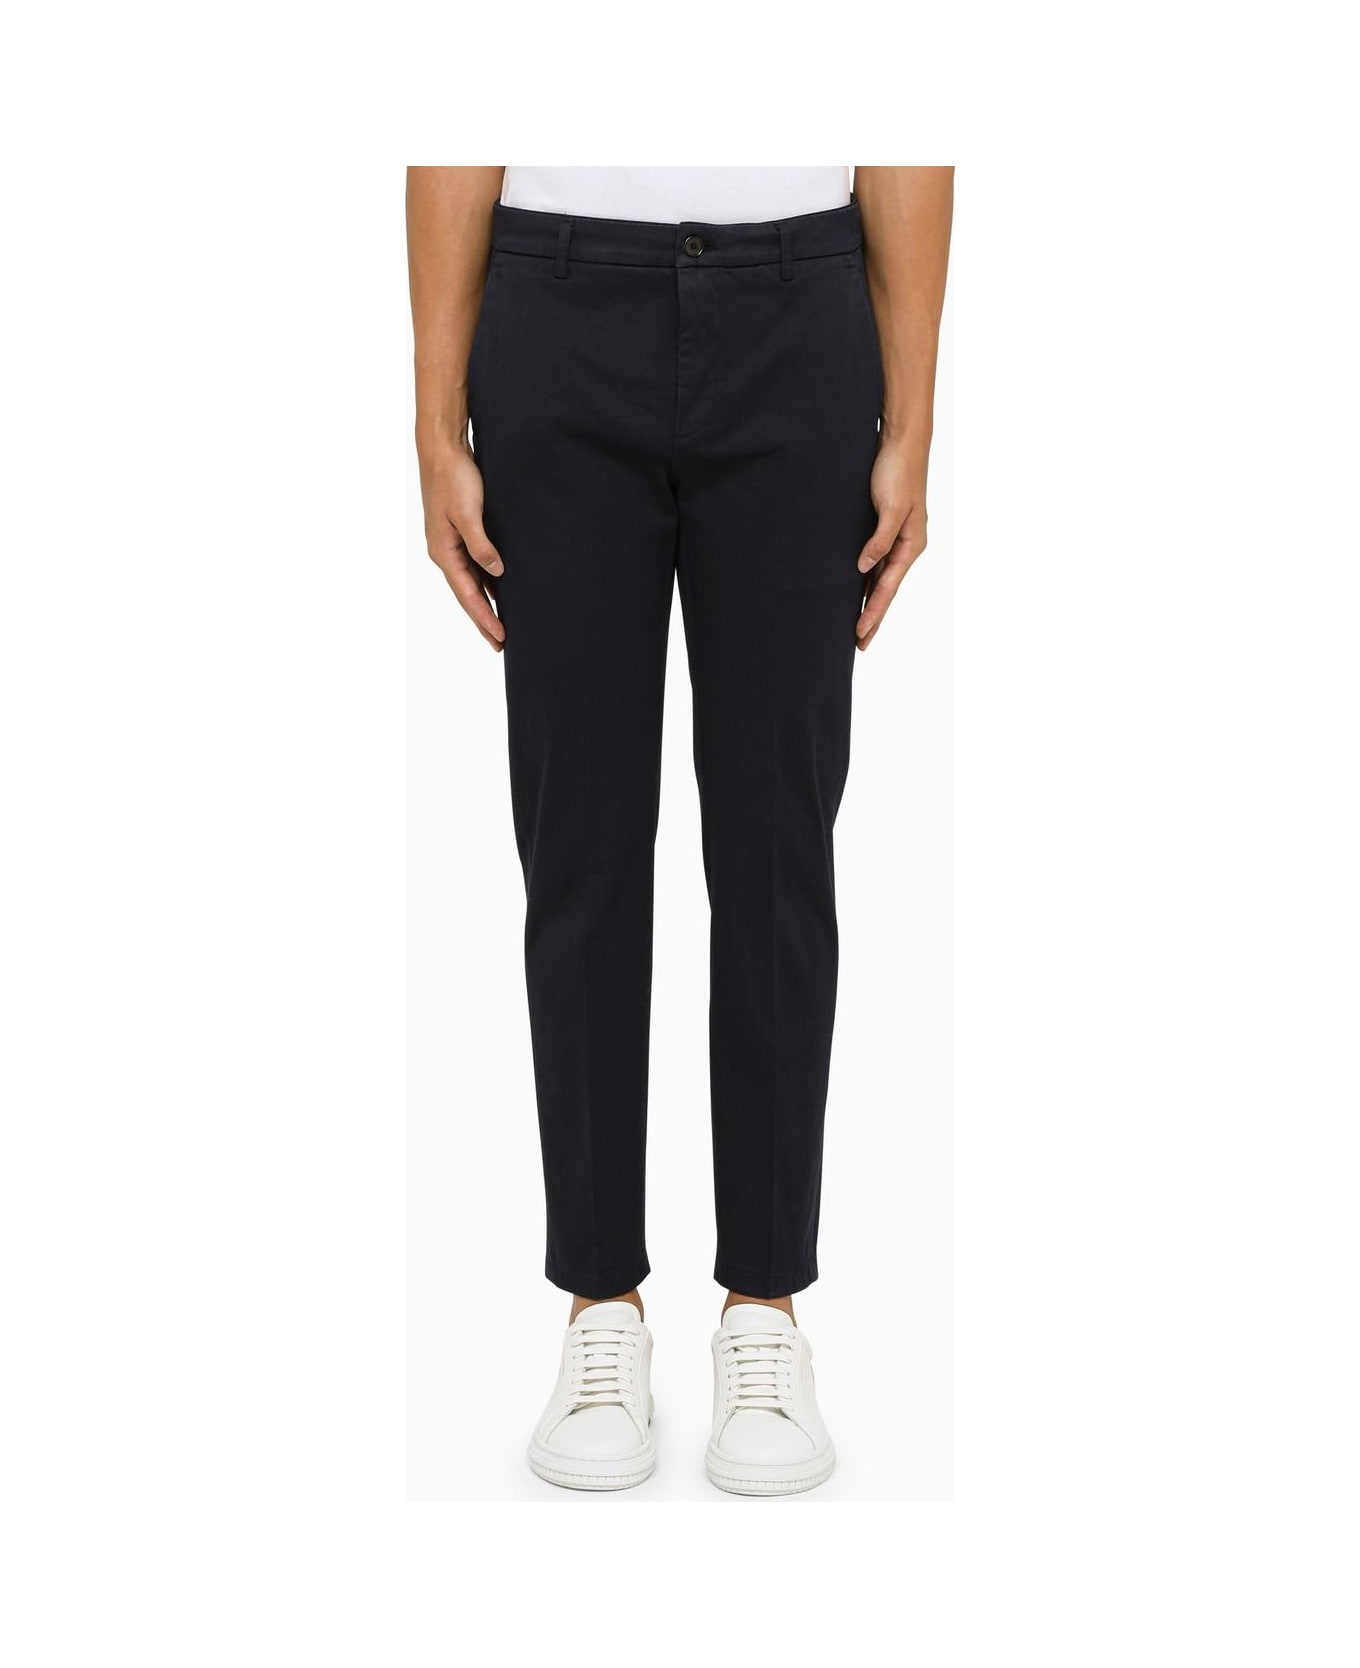 Department Five Navy Stretch Cotton Chinos Department Five